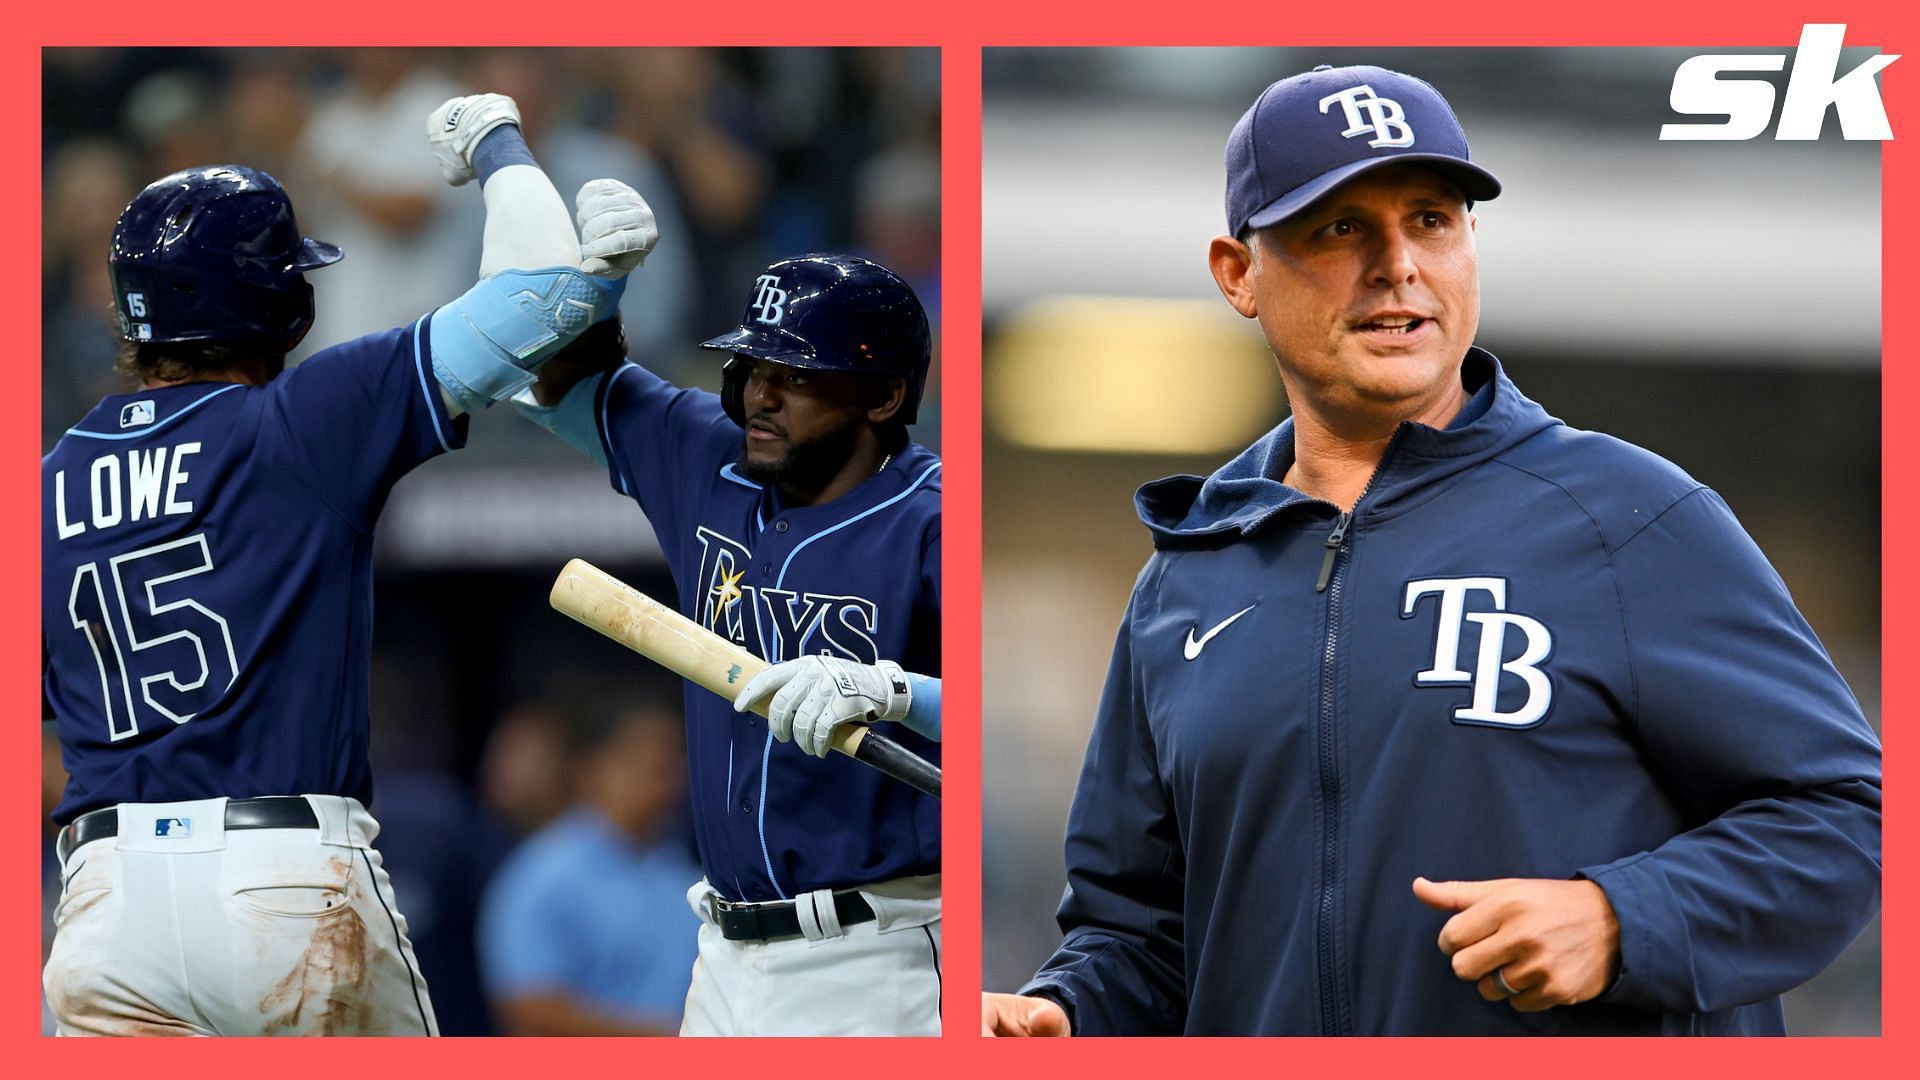 Tampa Bay Rays: Predicting how well the team could do in 2023